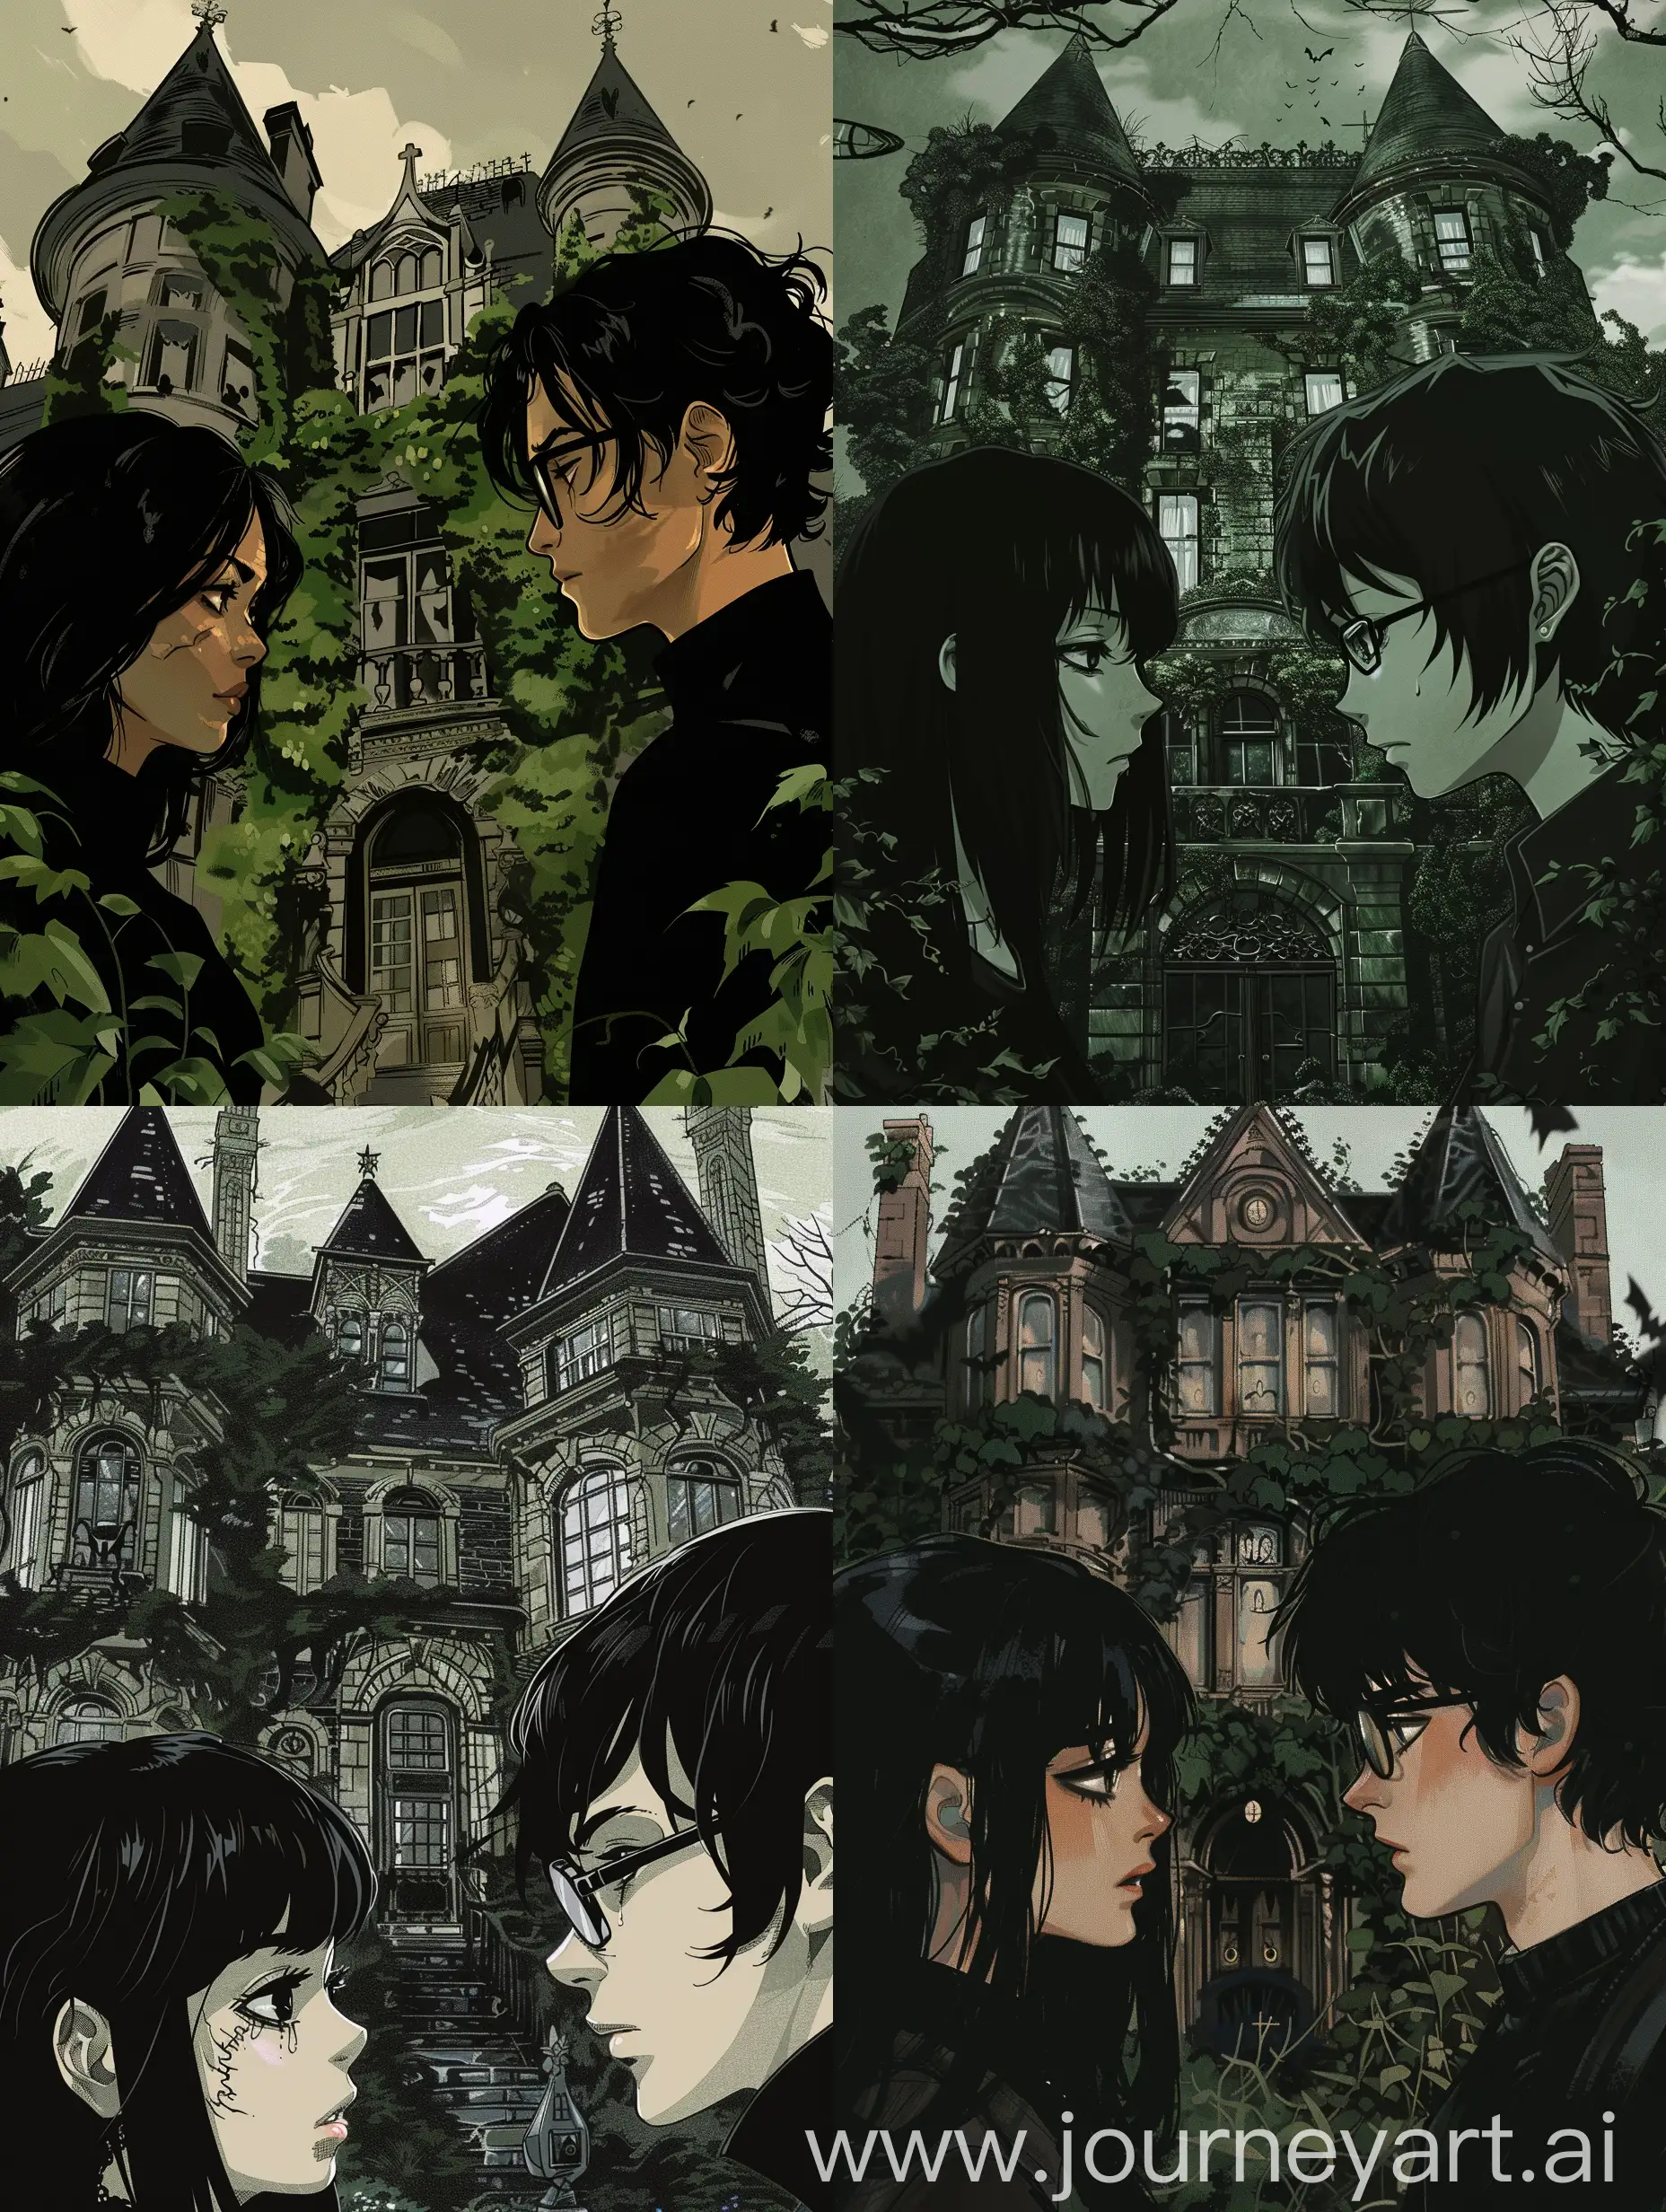 Mysterious-Manor-with-BlackHaired-Couple-Gazing-Intensely